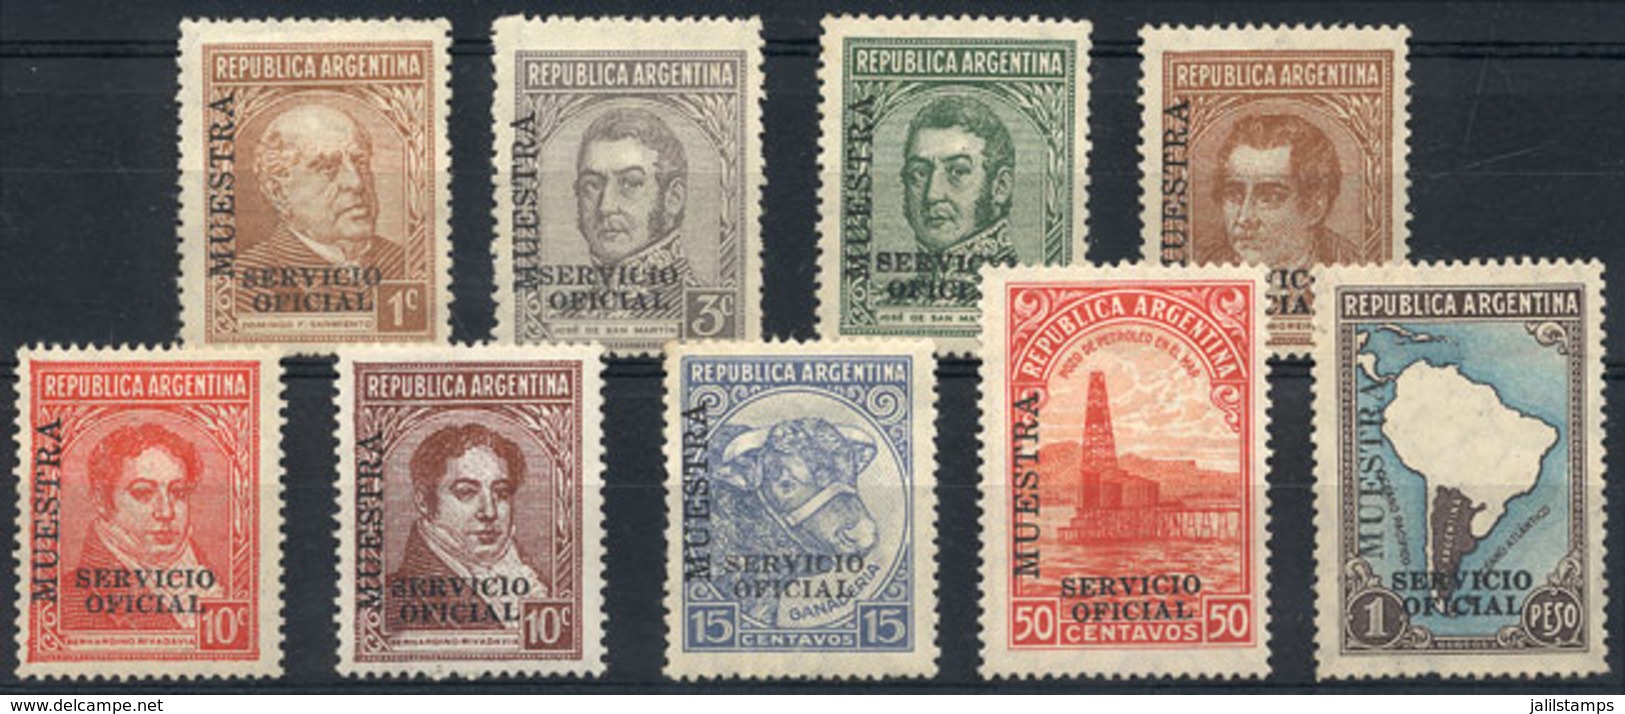 ARGENTINA: GJ.630 + Other Values, 9 Stamps Of The Proceres & Riquezas I Issue With MUESTRA Ovpt, VF Quality, Rare! - Oficiales